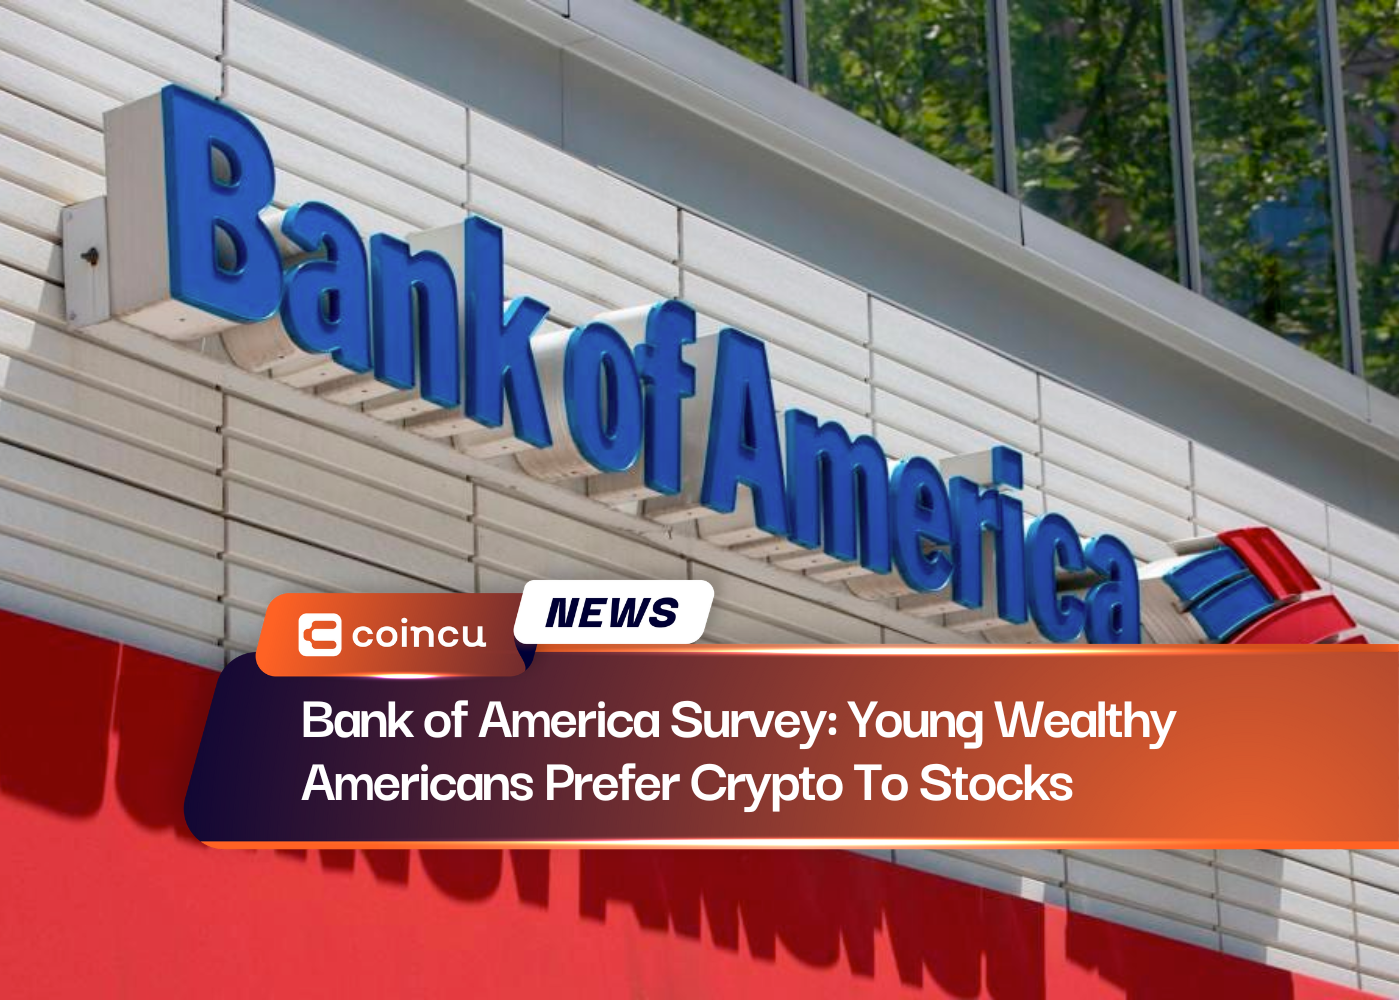 Bank of America Survey: Young Wealthy Americans Prefer Crypto To Stocks